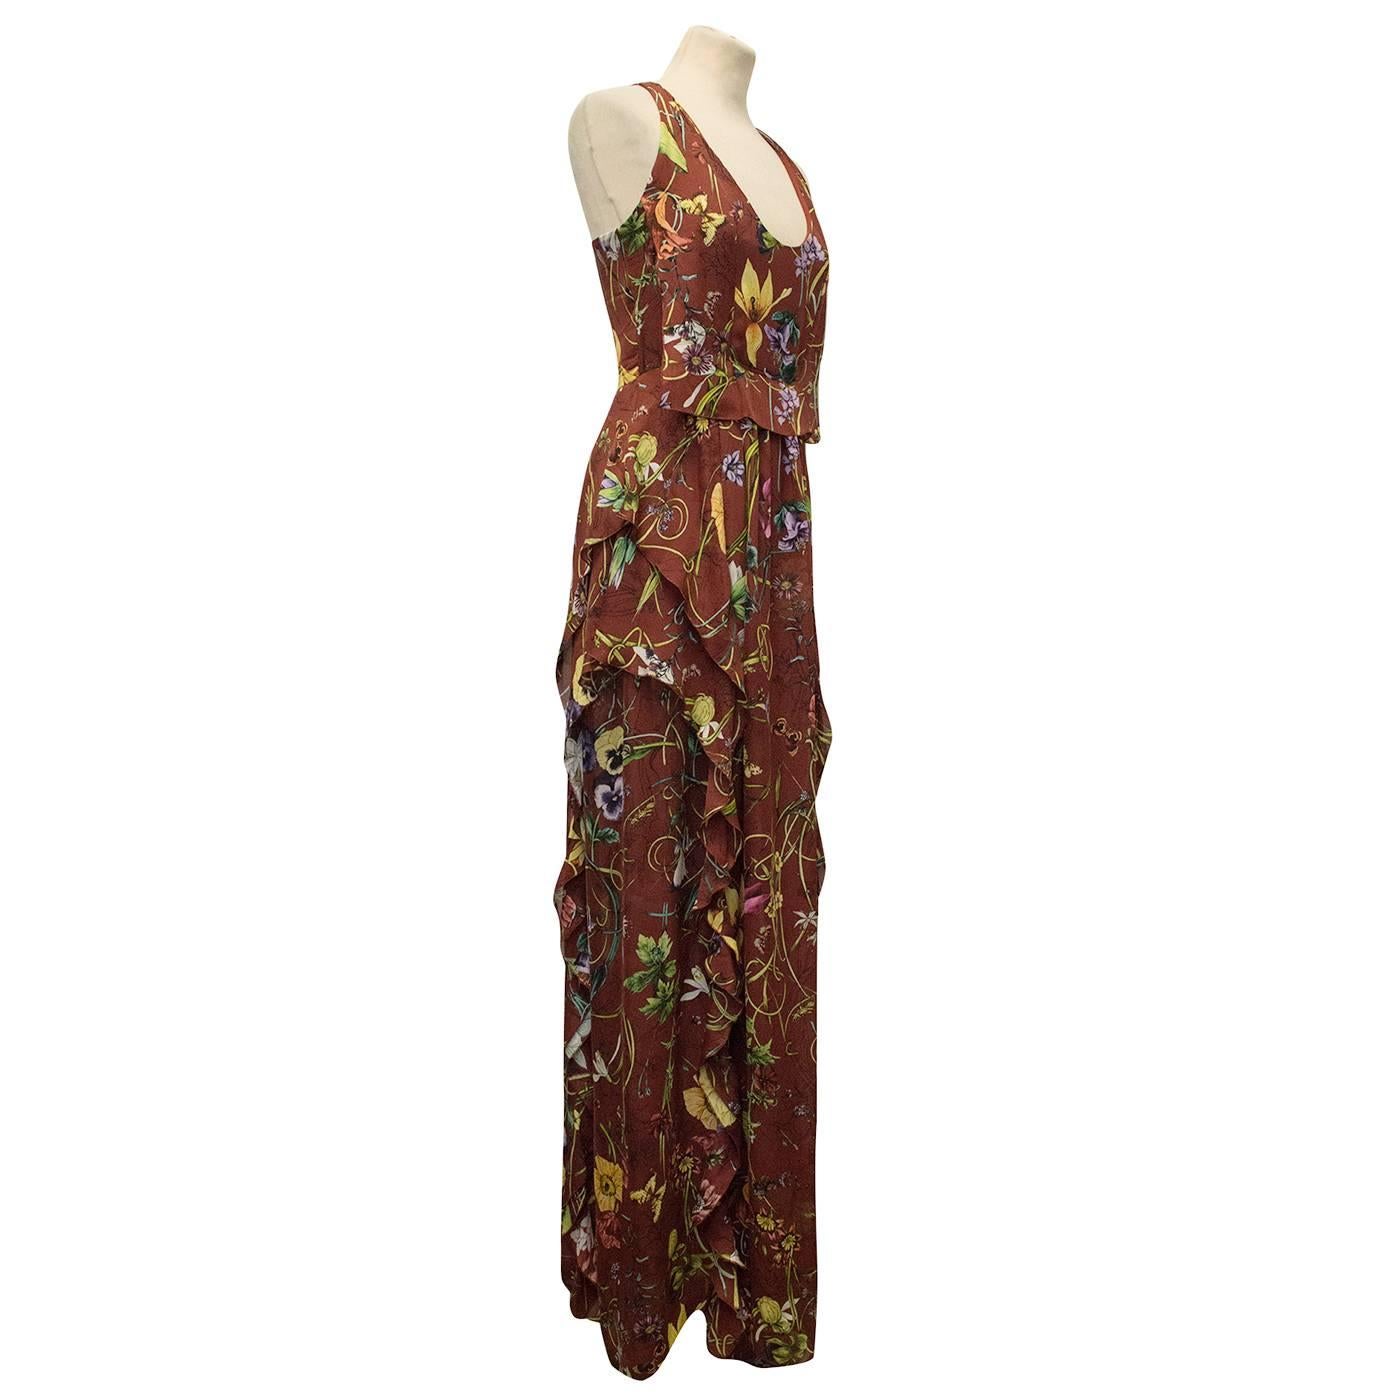 Gucci Floral Maxi Dress. The dress is brown featuring a floral print and is sleeveless with a Halter-style neck and back and a long ruffled skirt. Lined and fitted at the bust with a sheer overlay and small bustle. Size 4.

Made in Italy.